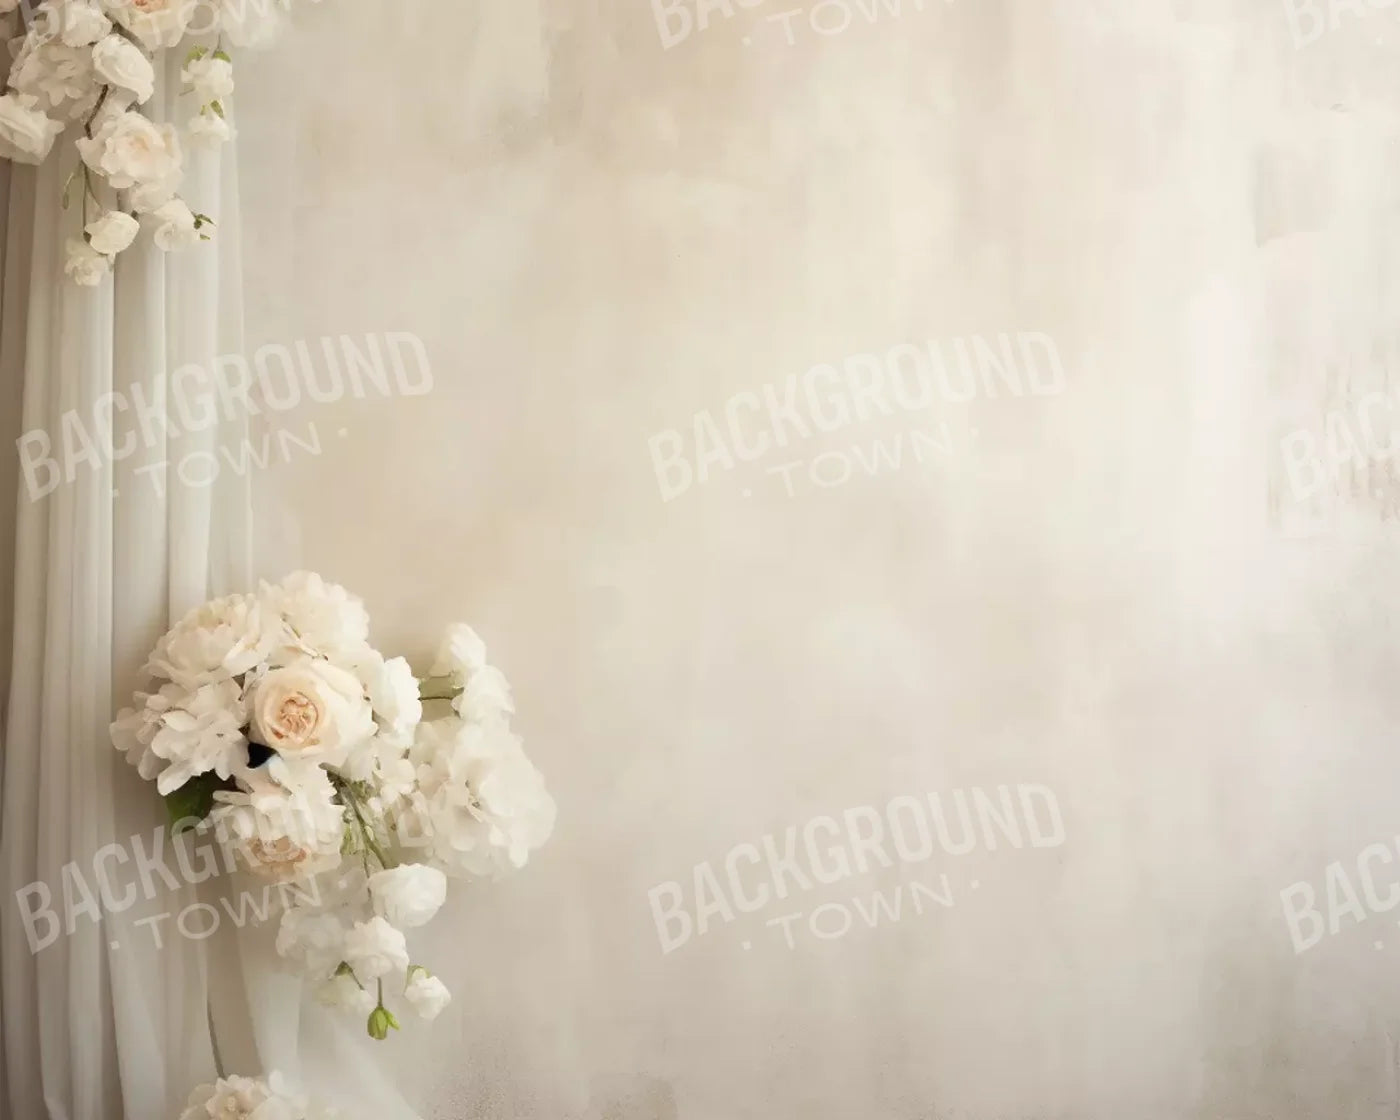 Plaster Wall With Florals 10’X8’ Fleece (120 X 96 Inch) Backdrop